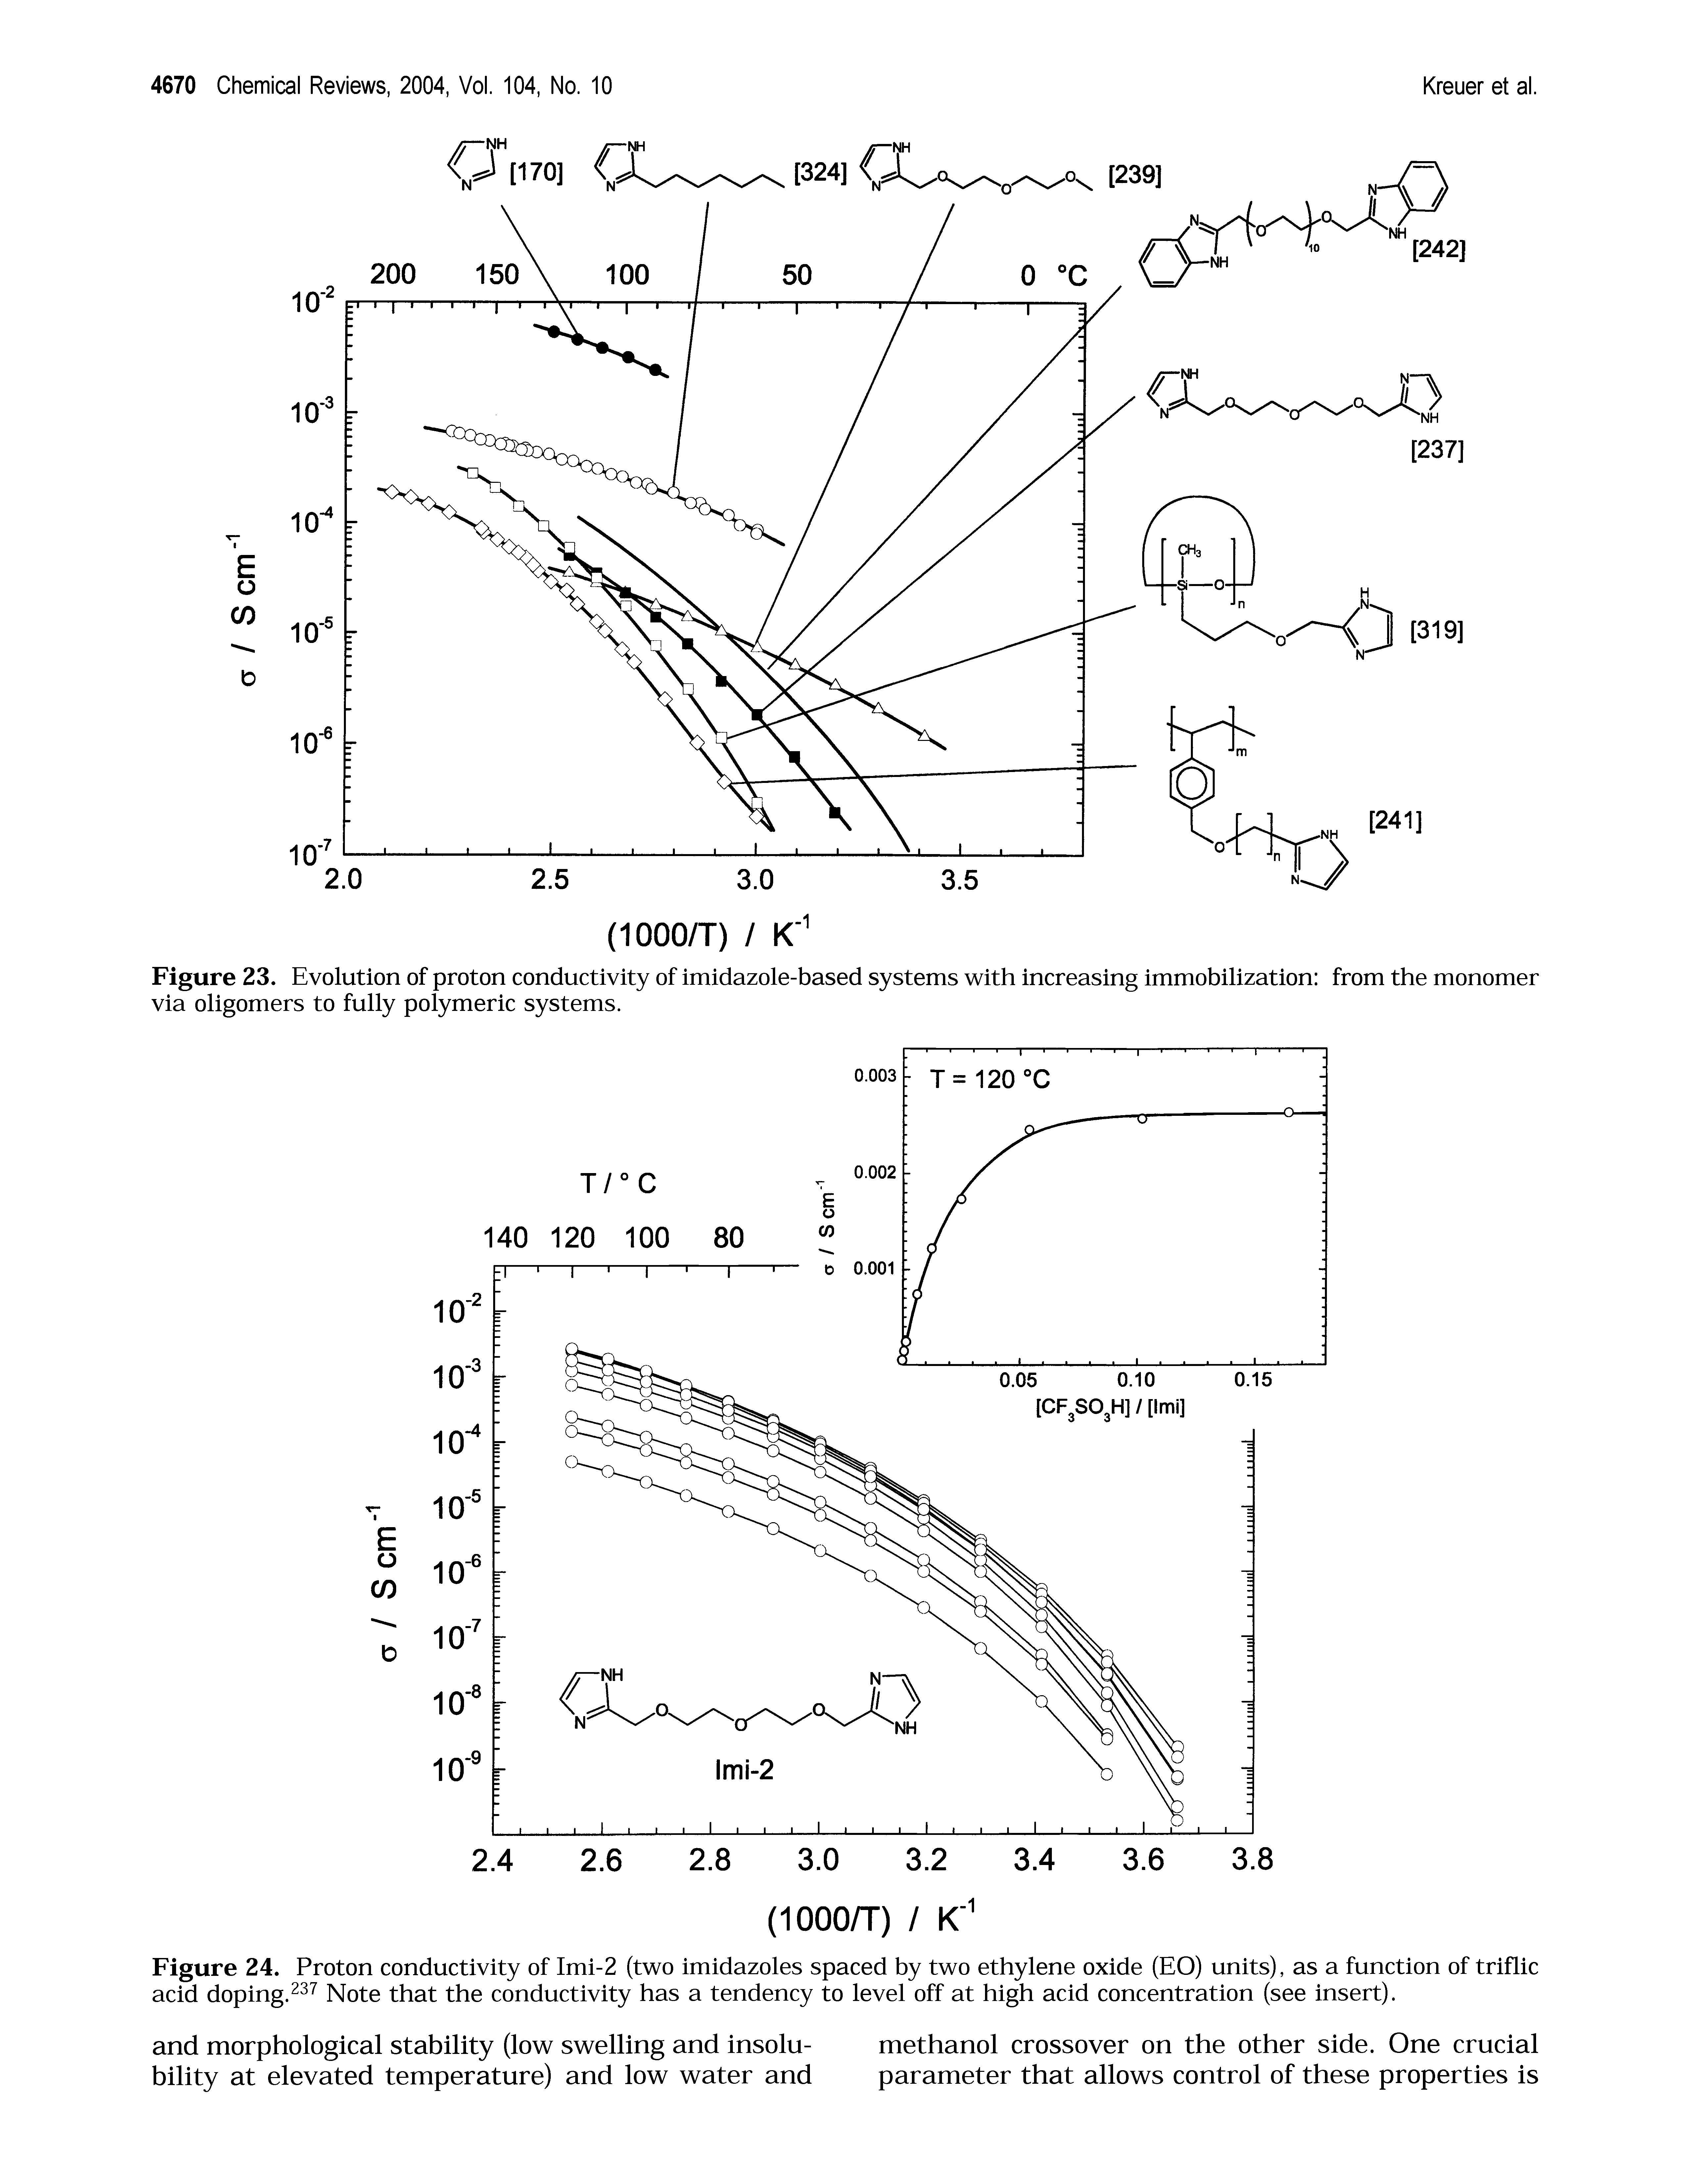 Figure 24. Proton conductivity of Imi-2 (two imidazoles spaced by two ethylene oxide (EO) units), as a function of triflic acid doping.237 Note that the conductivity has a tendency to level off at high acid concentration (see insert).